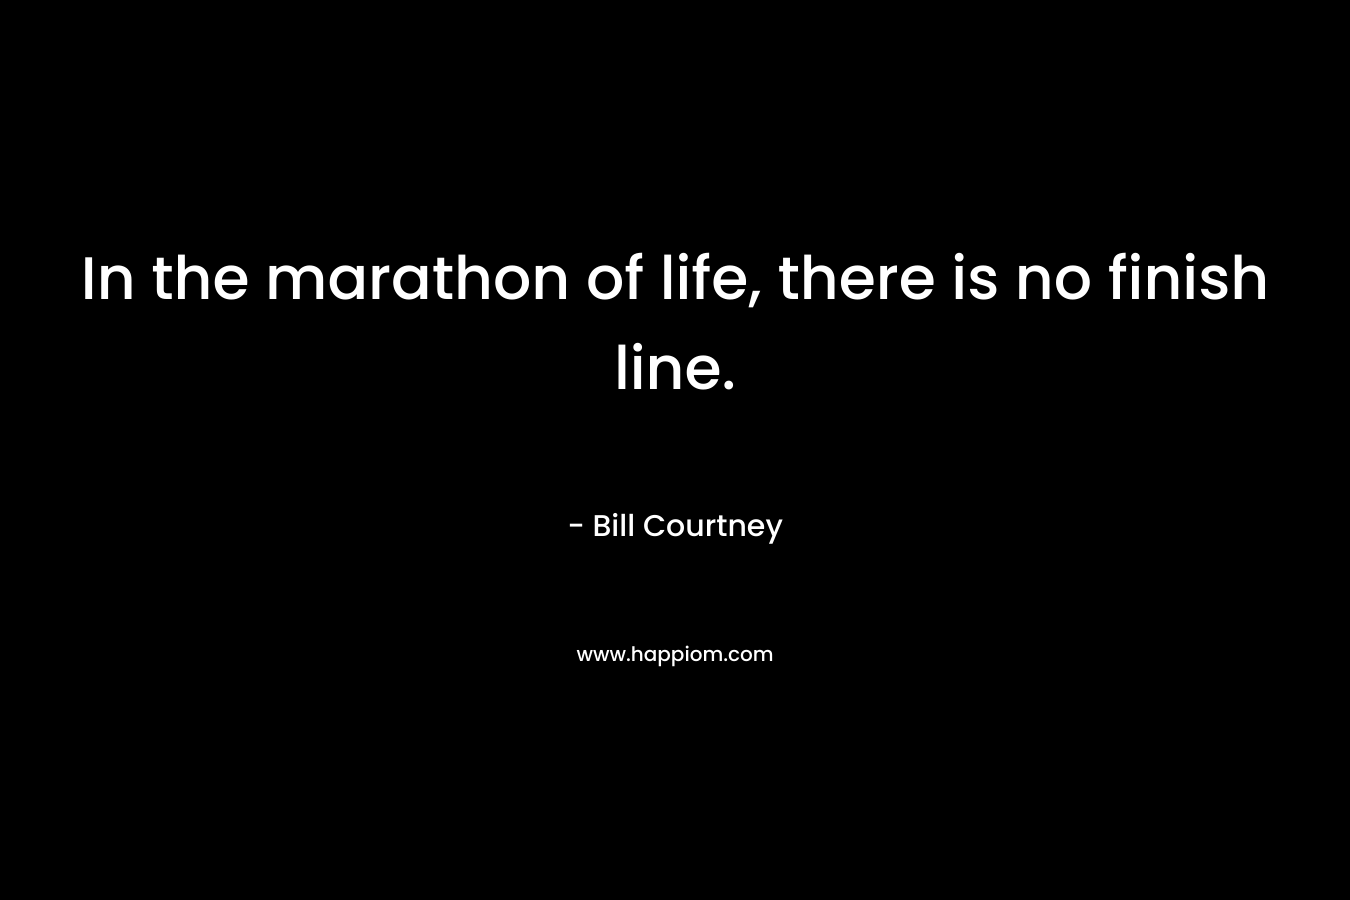 In the marathon of life, there is no finish line. – Bill Courtney